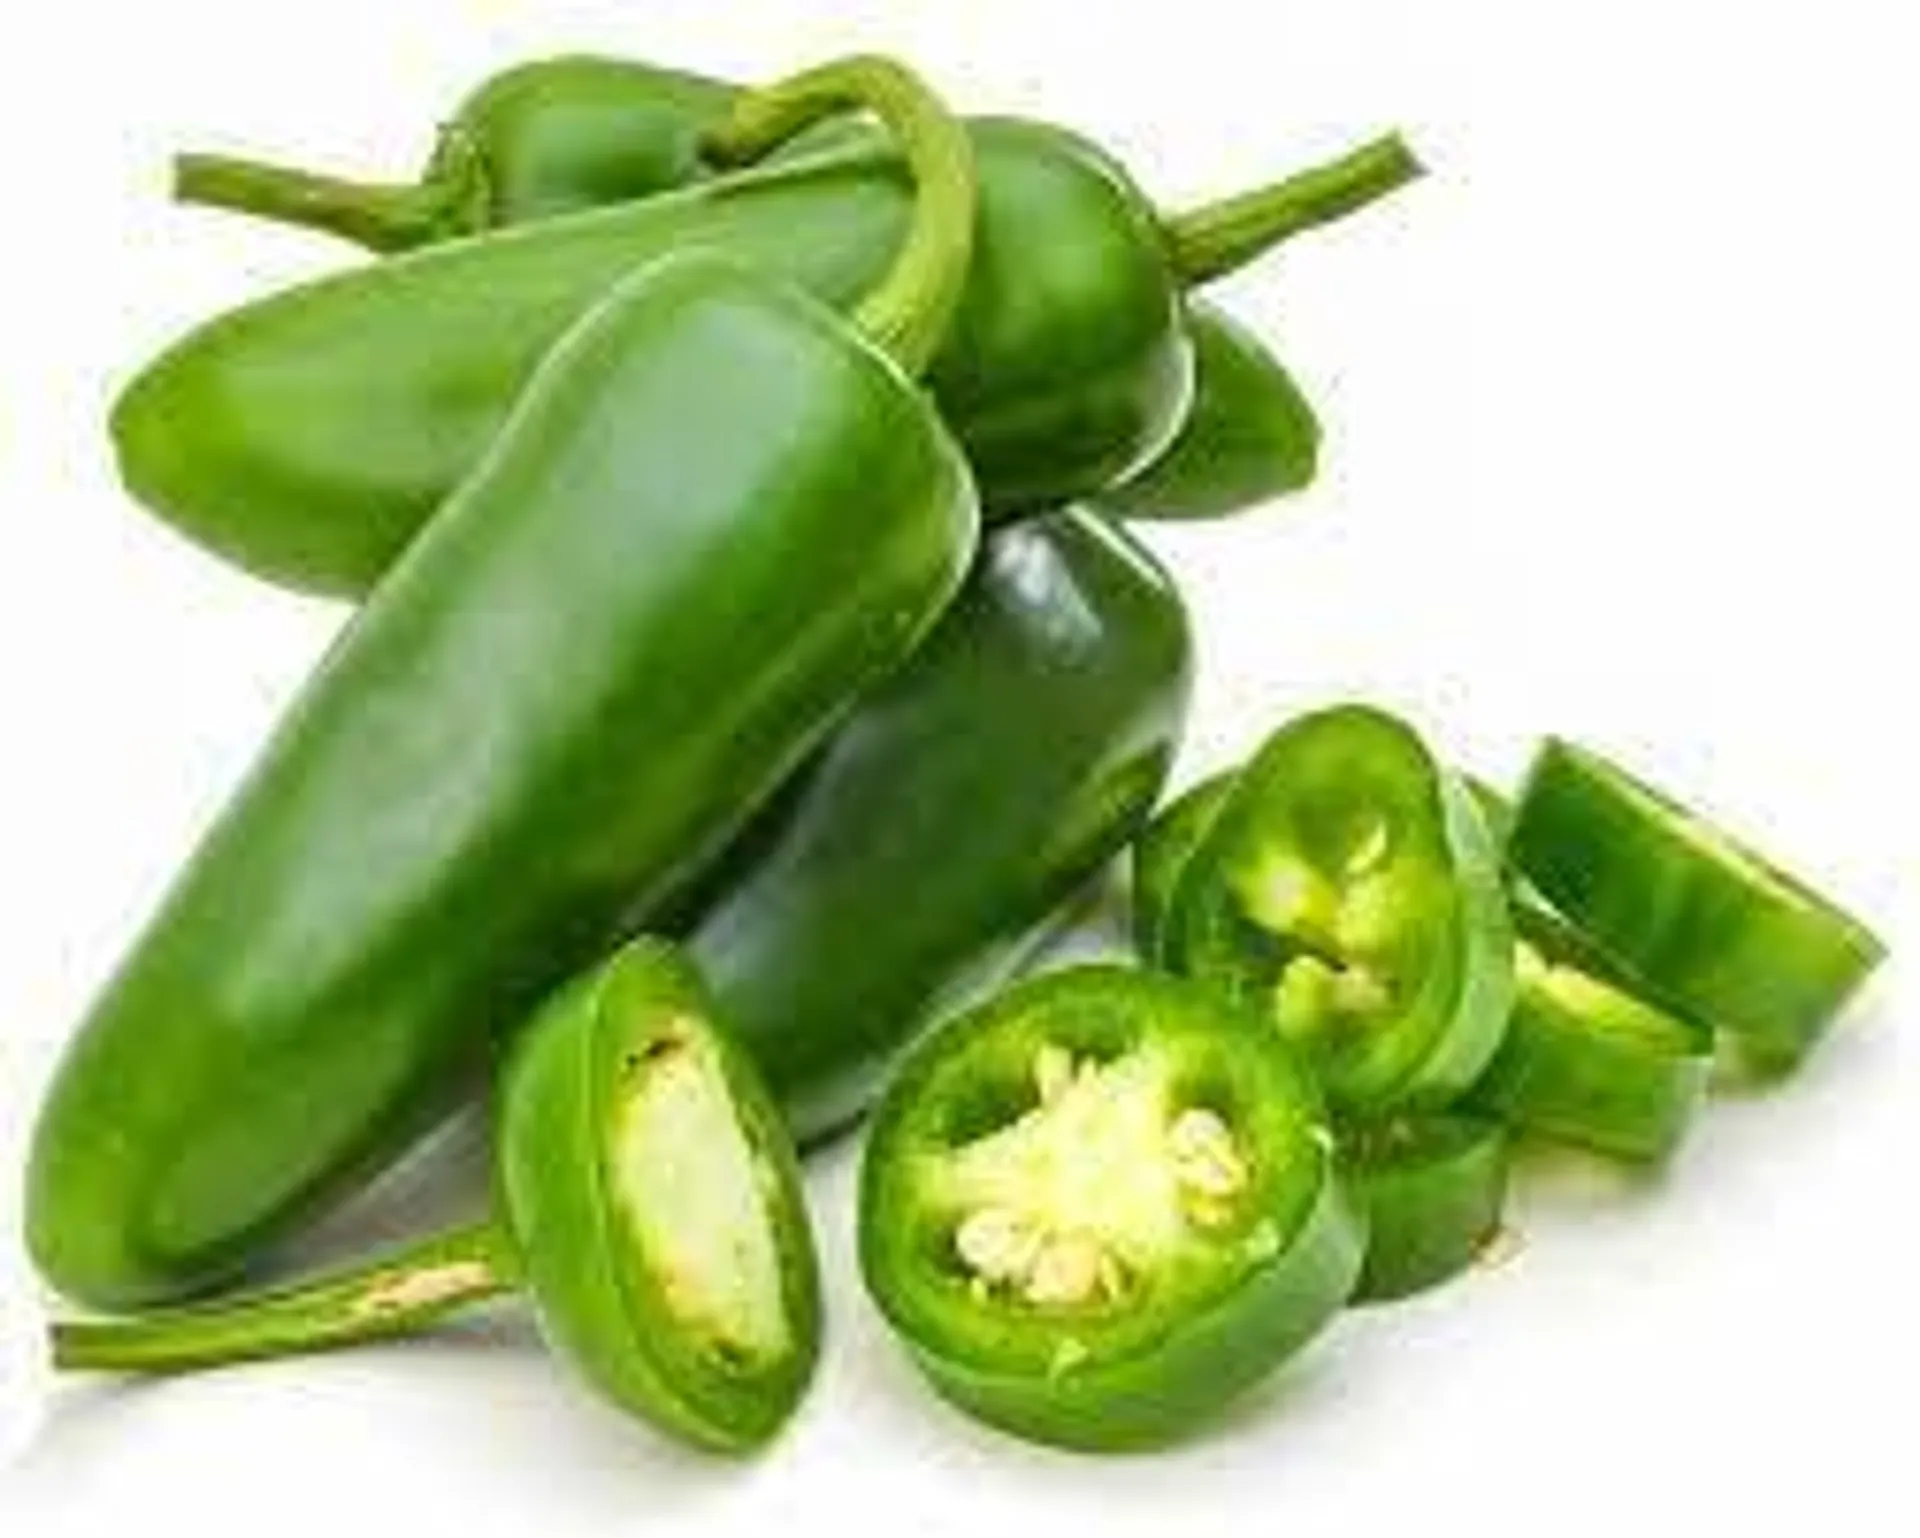 JALAPENO PEPPERS